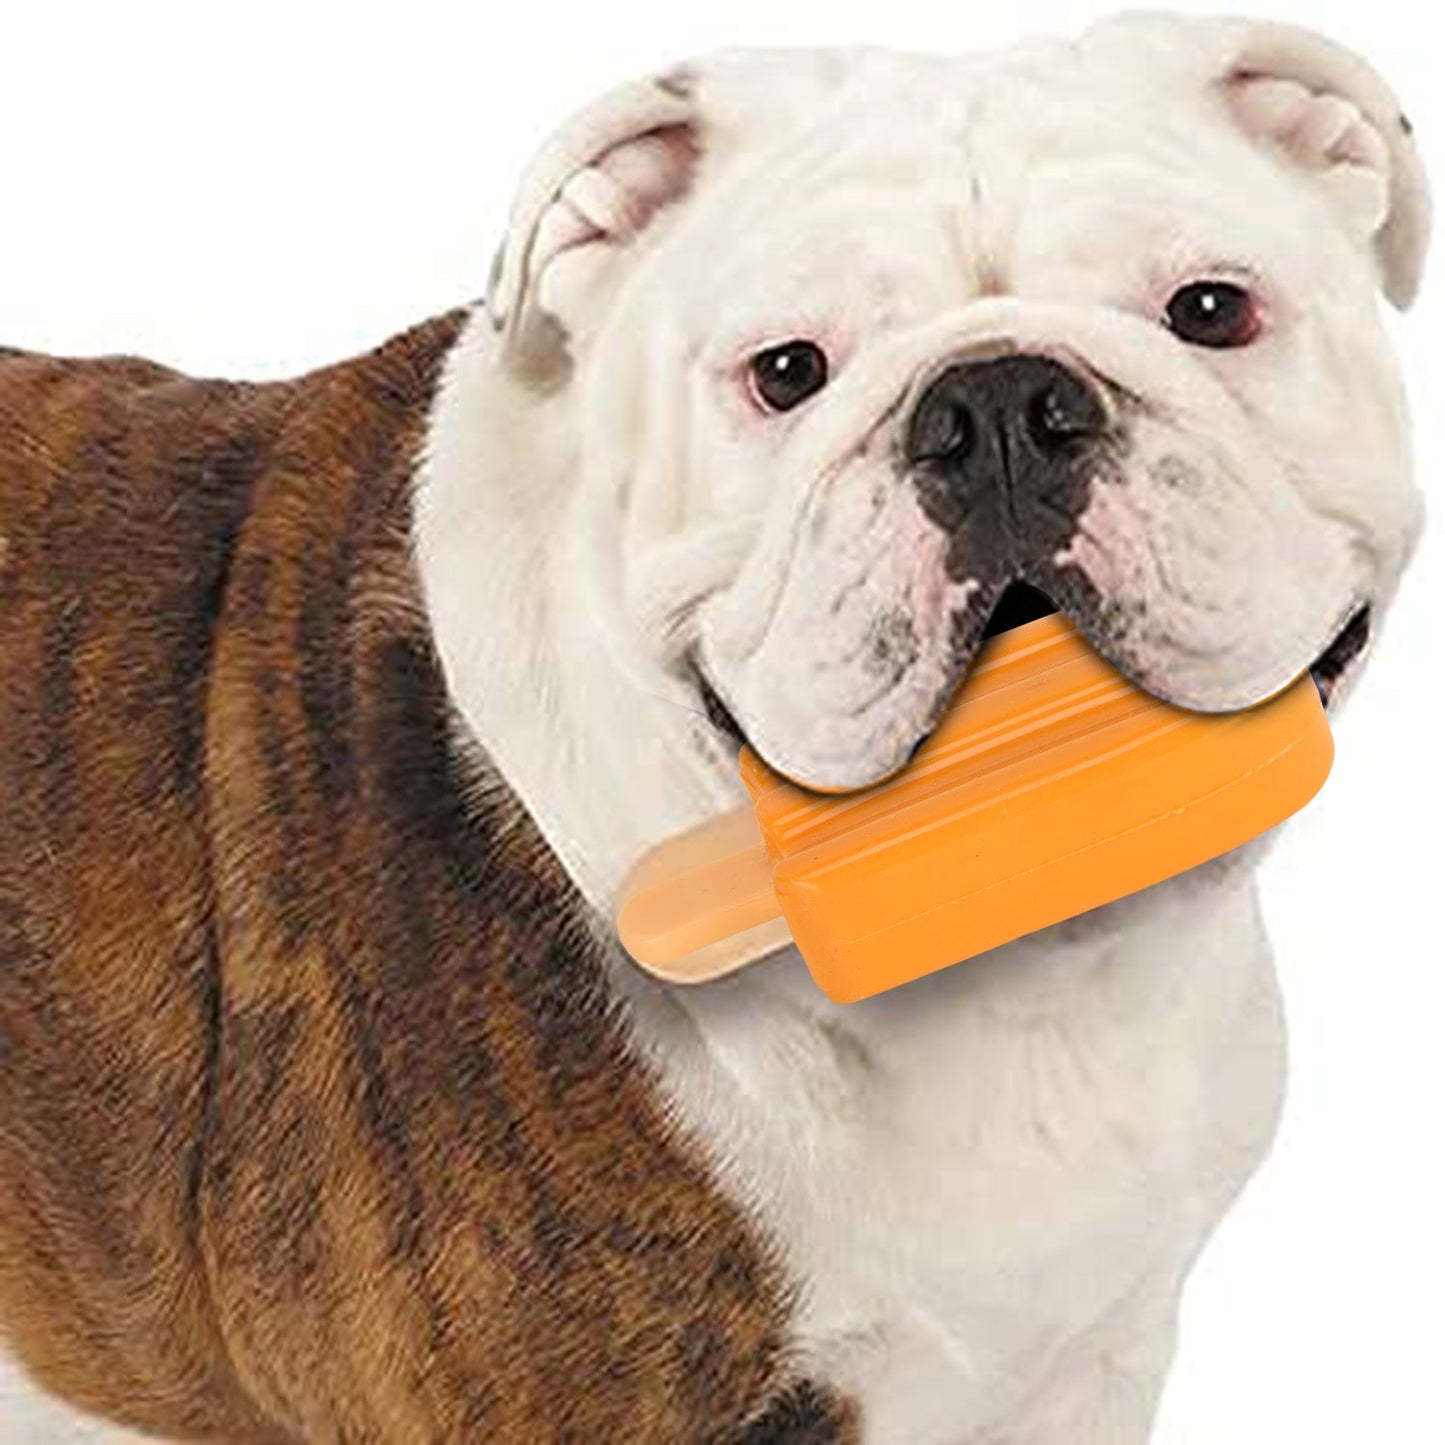 Basil Cool Lick Silicon Ice-Cream Pet Toy, Freeze and Play (Orange)